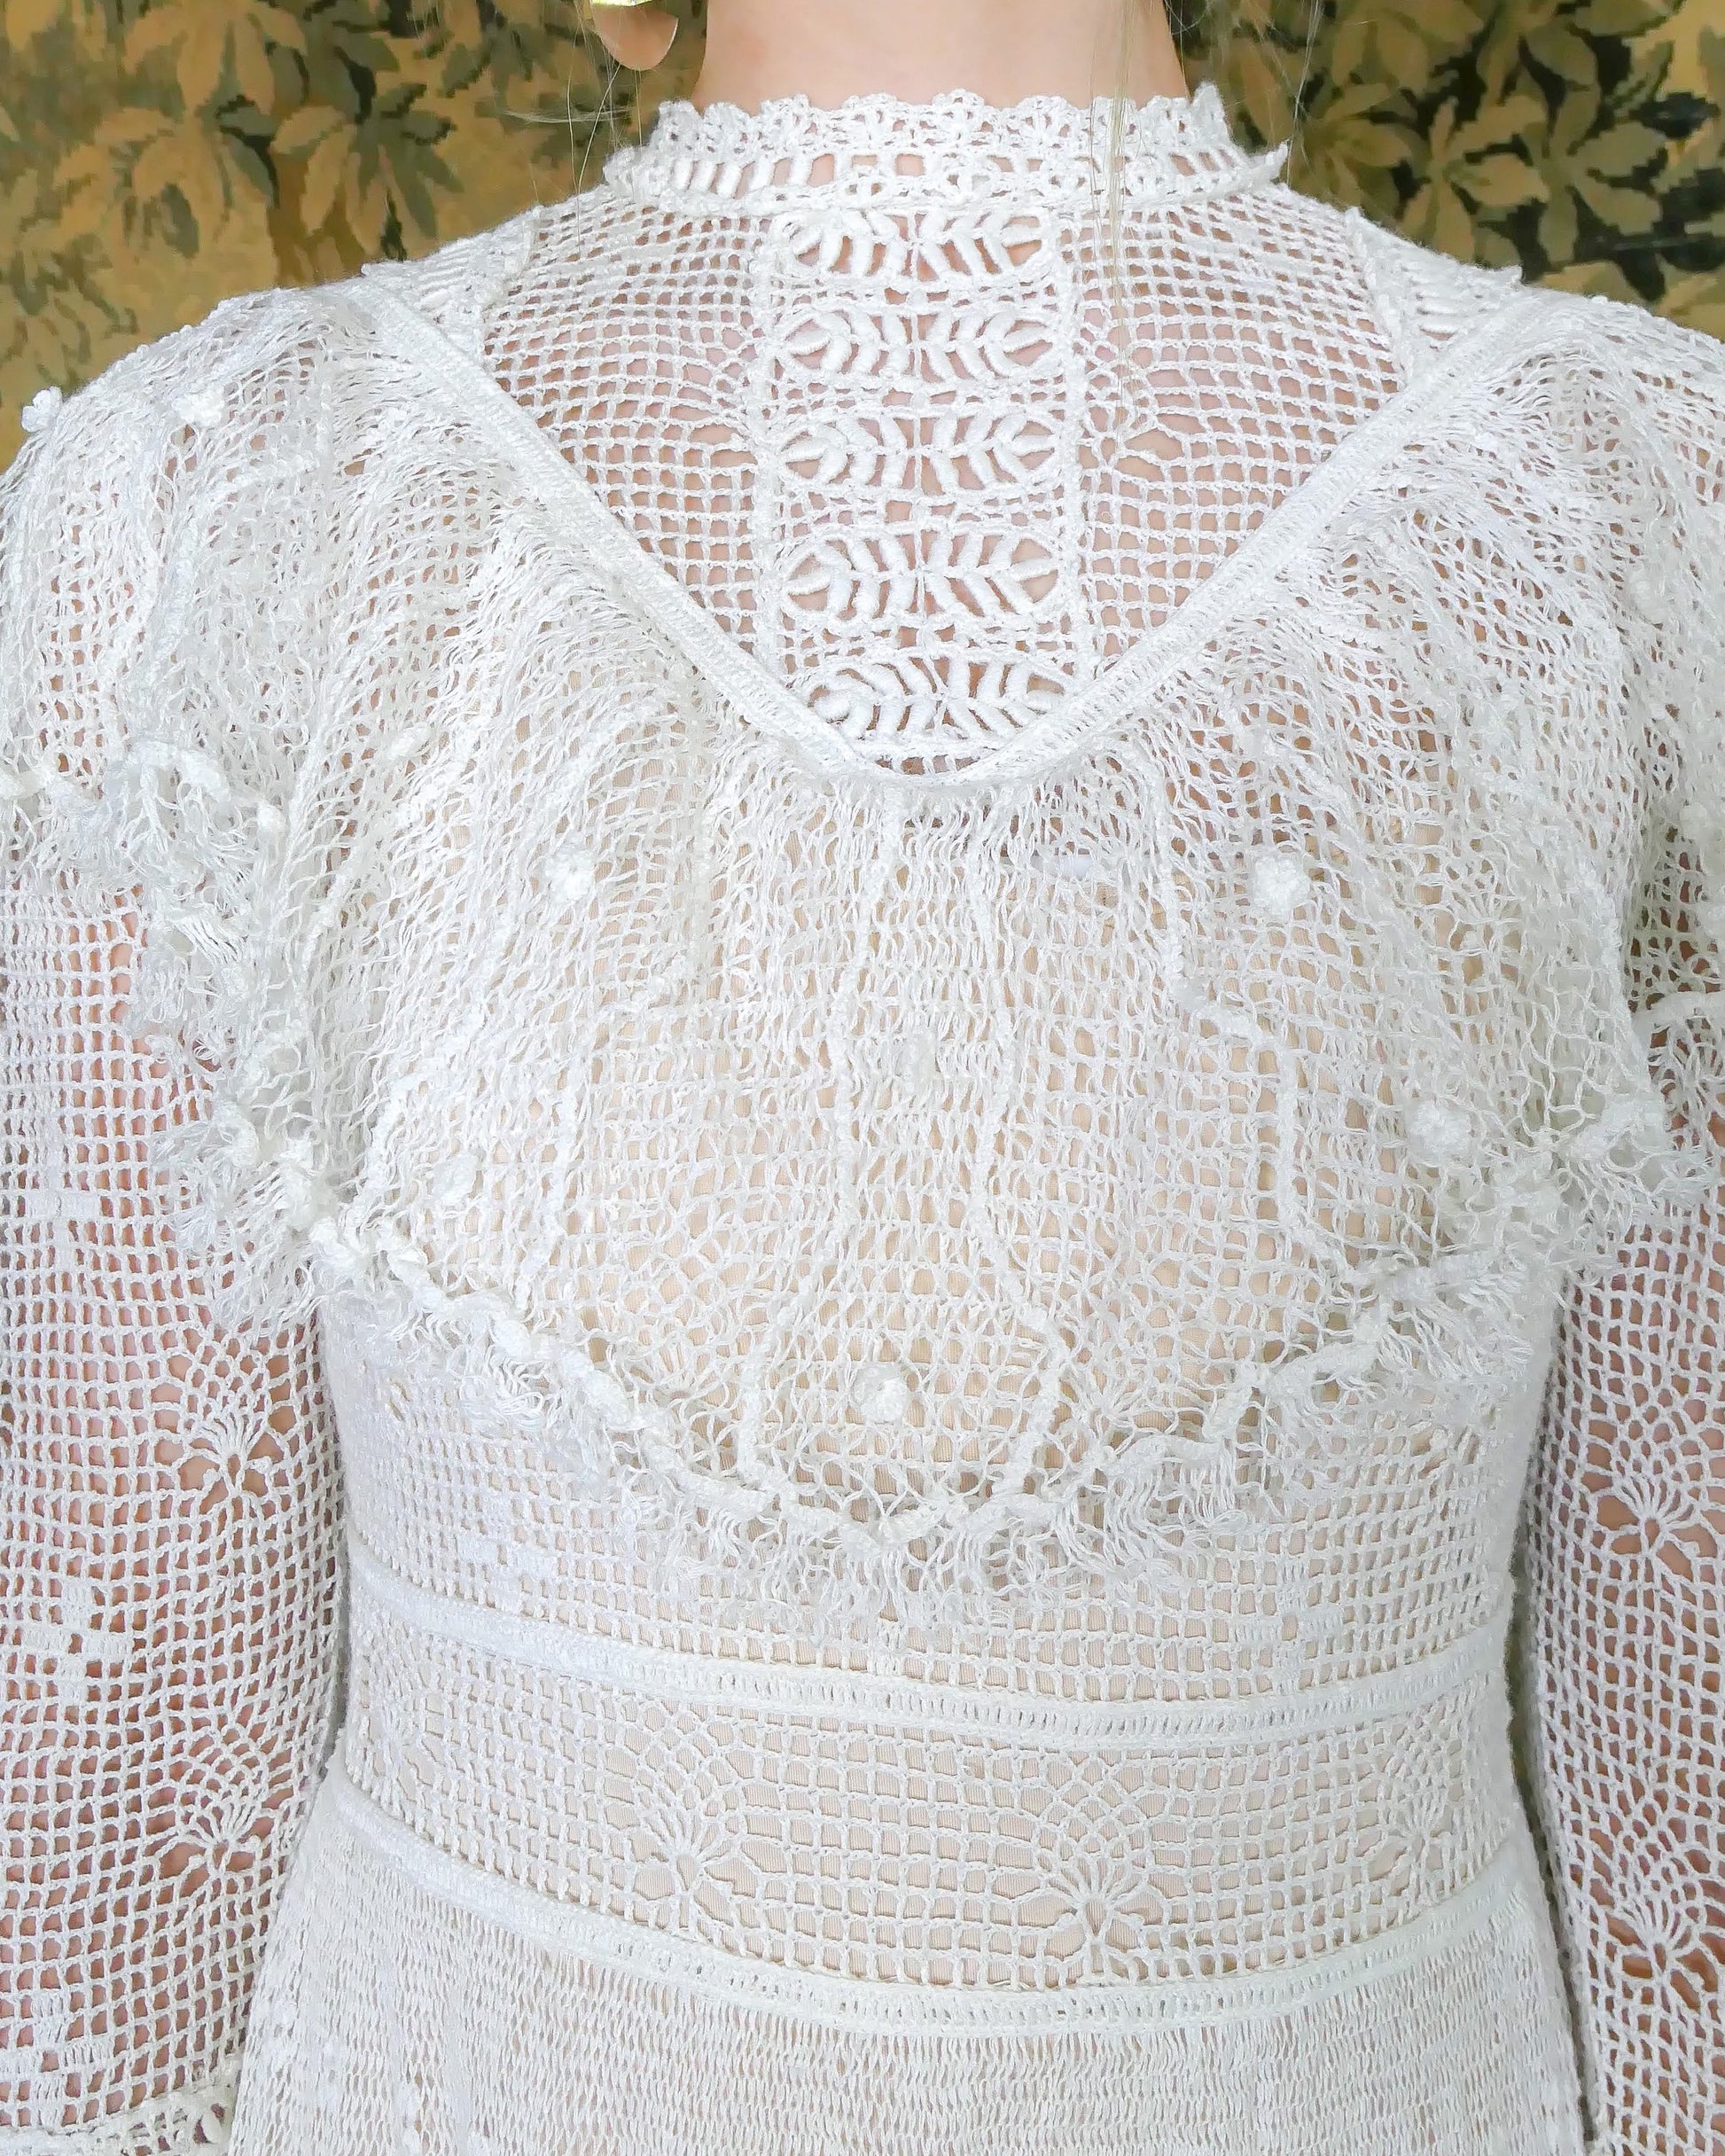 Closeup of Victorian neckline and ruffled collar. Lim's original hand crocheted maxi dress from the 1980s. Ruffle trim along the chest covering the breast area, and two tiered ruffle hem at the bottom of the dress. Very sheer crochet dress, fitted at the waist, with a tie at the back. Detailed crochet emellishment on the forearm, sleeve hem, and neckline. Model is wearing white colored dress.